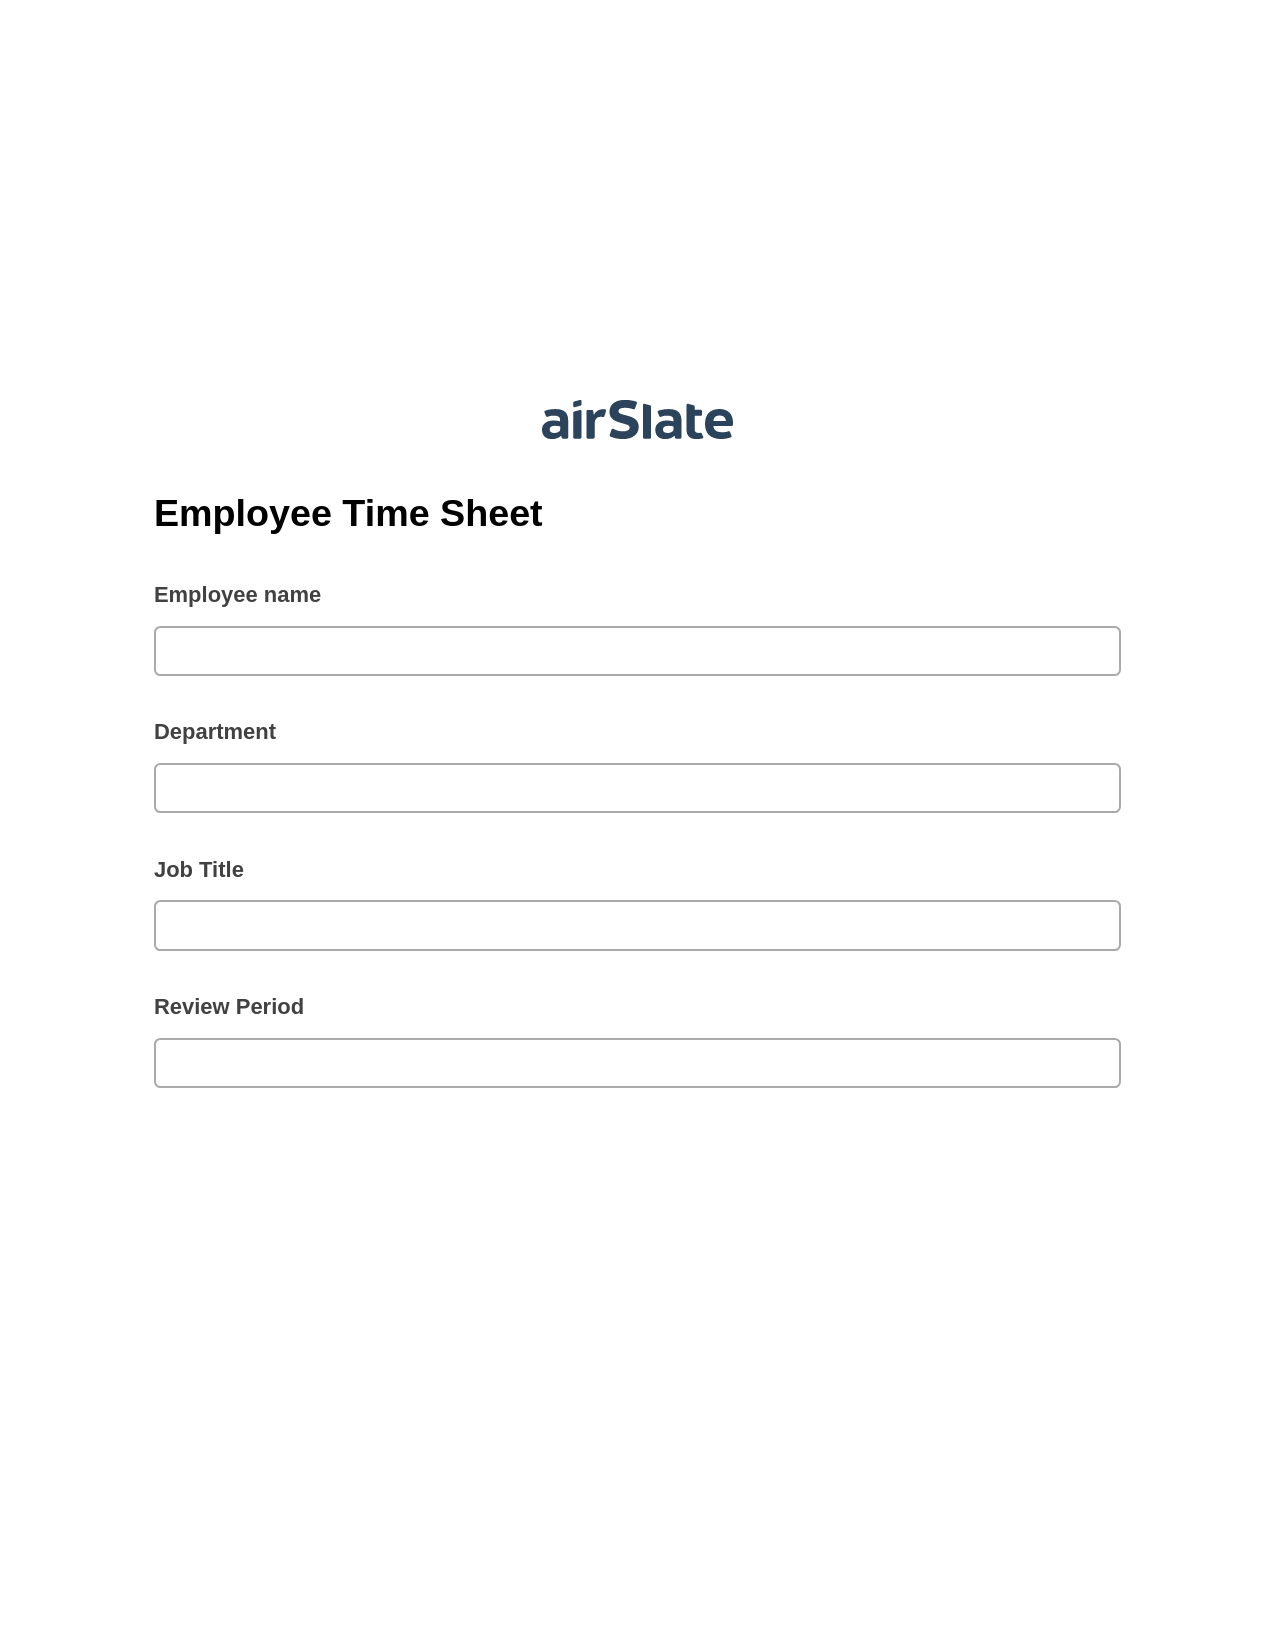 Employee Time Sheet Pre-fill from Excel Spreadsheet Bot, Create slate addon, Export to Google Sheet Bot